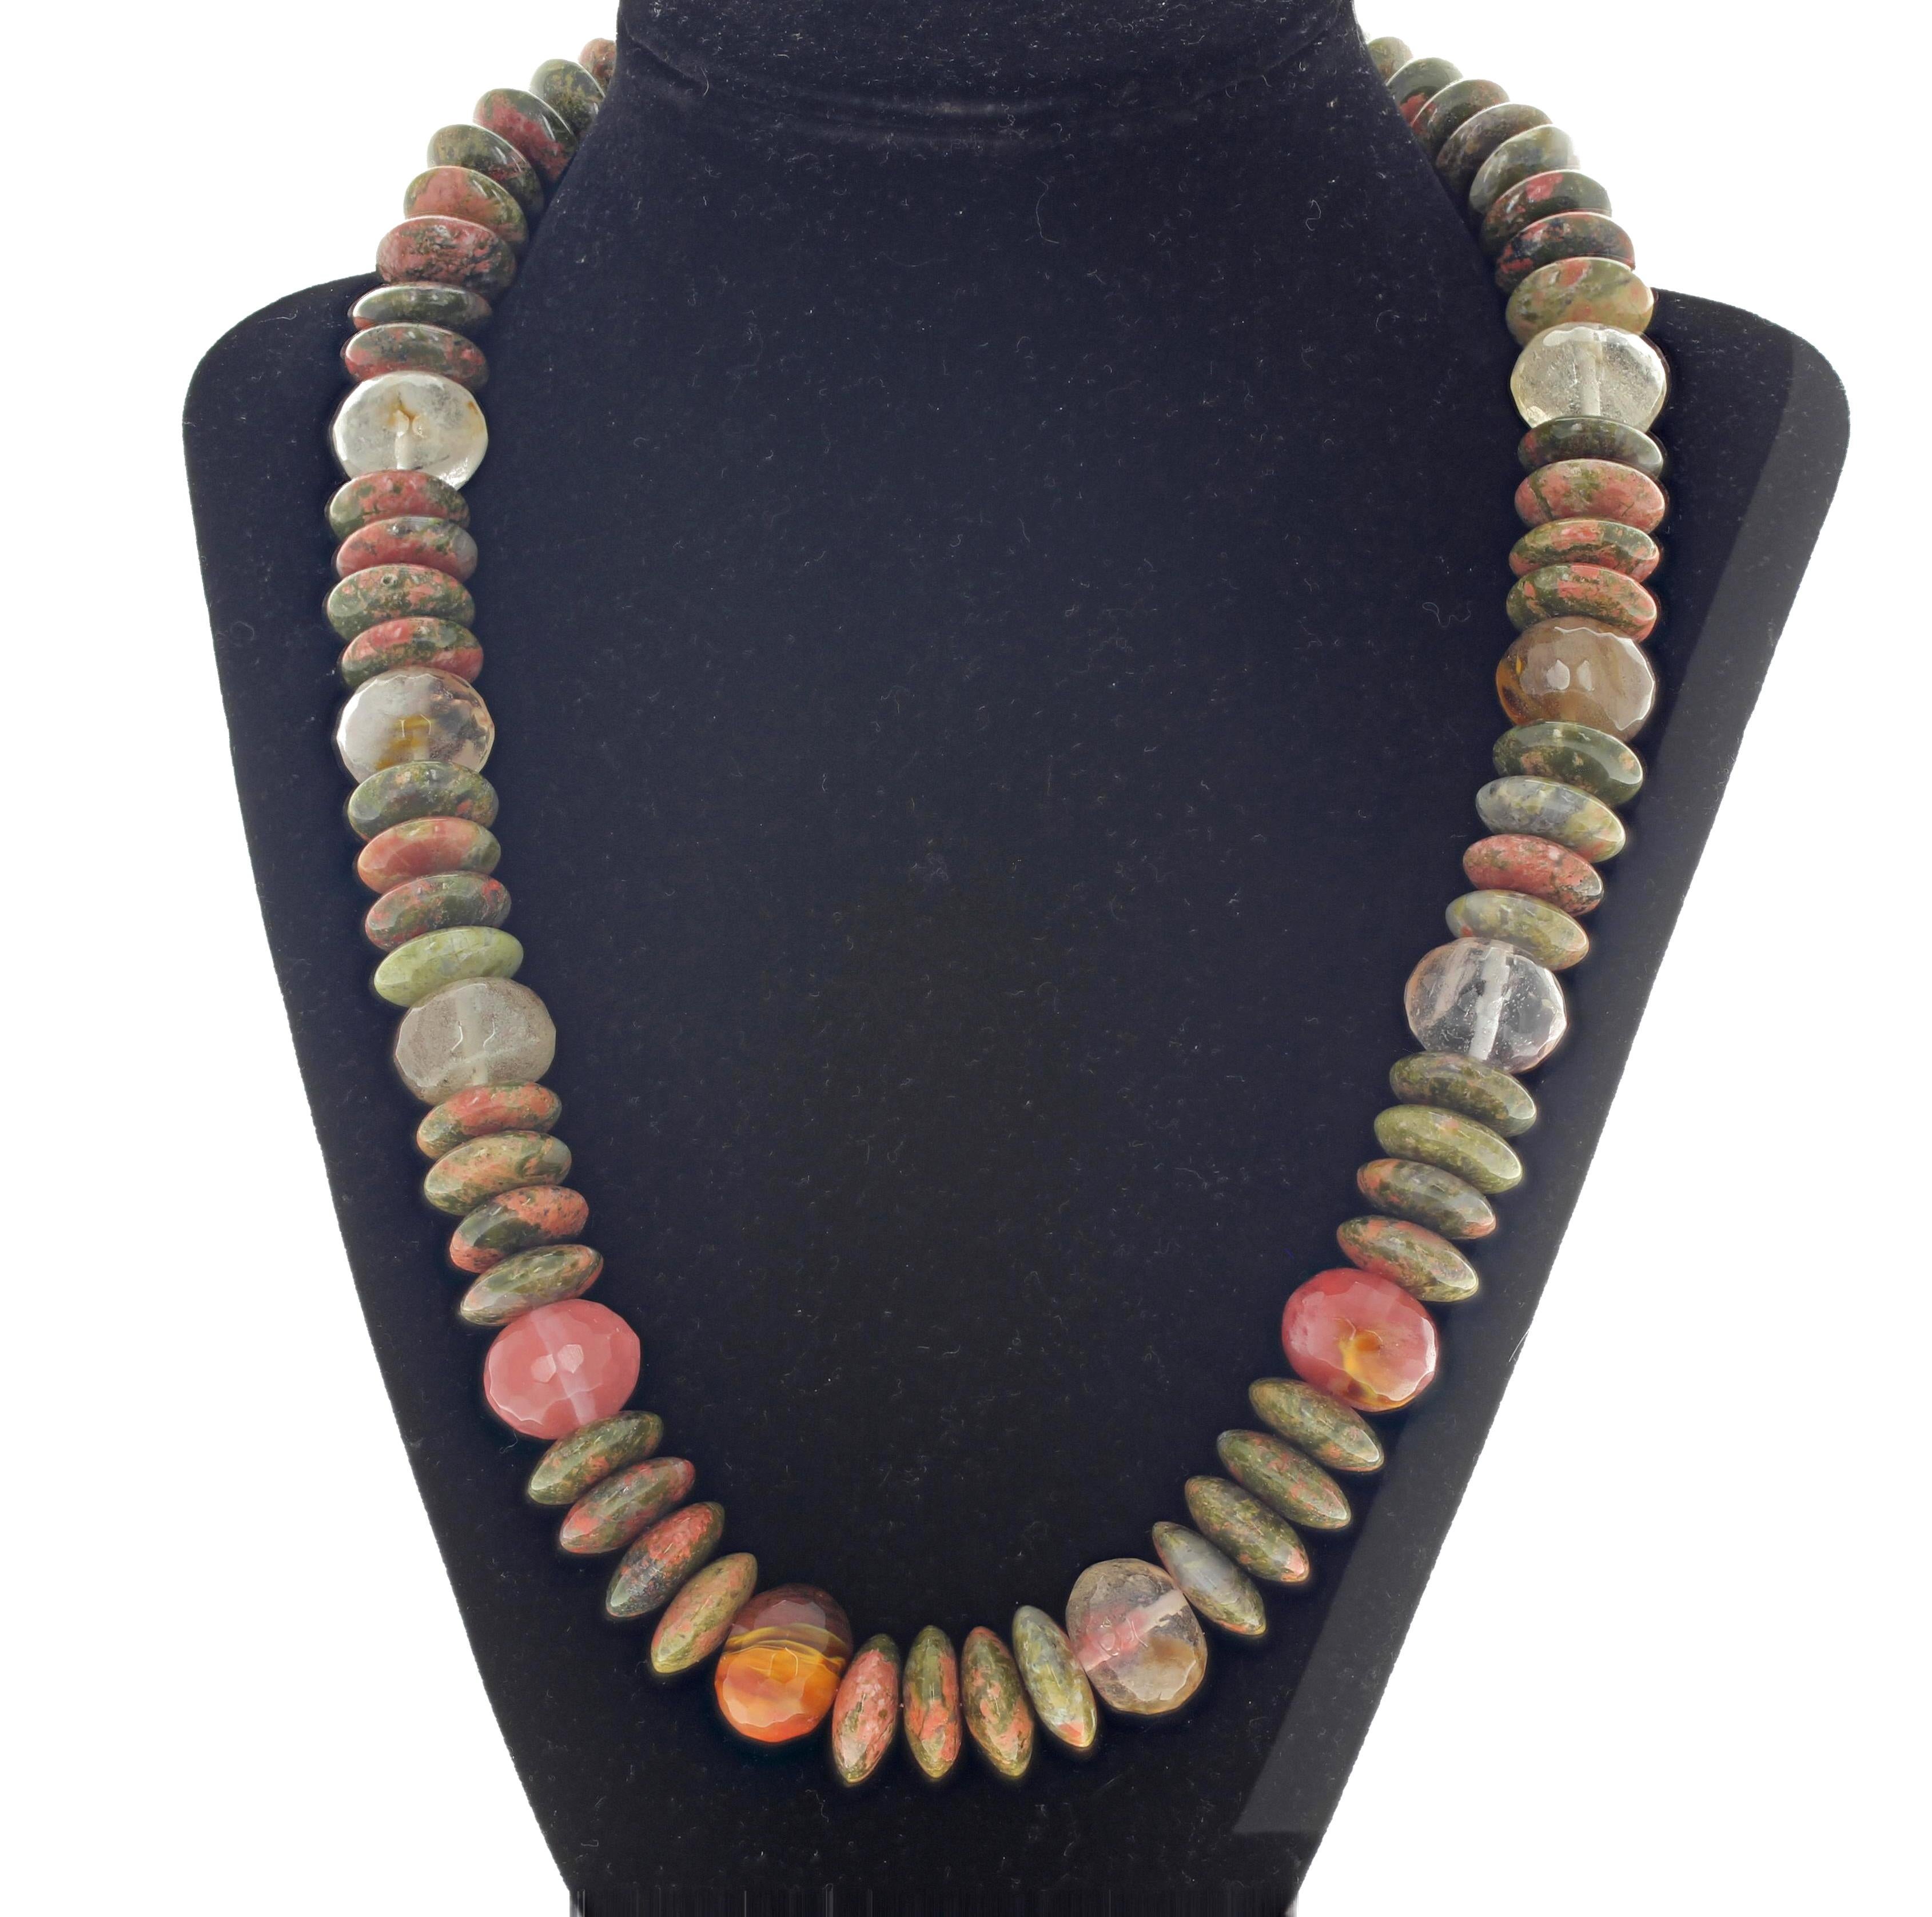 This looks hand painted !! The Jasper is a natural pink and green design (16 mm across) and is enhanced with shining gem cut Agates and Quartz set in a 20.5 inch necklace with a gold tone hook clasp.   